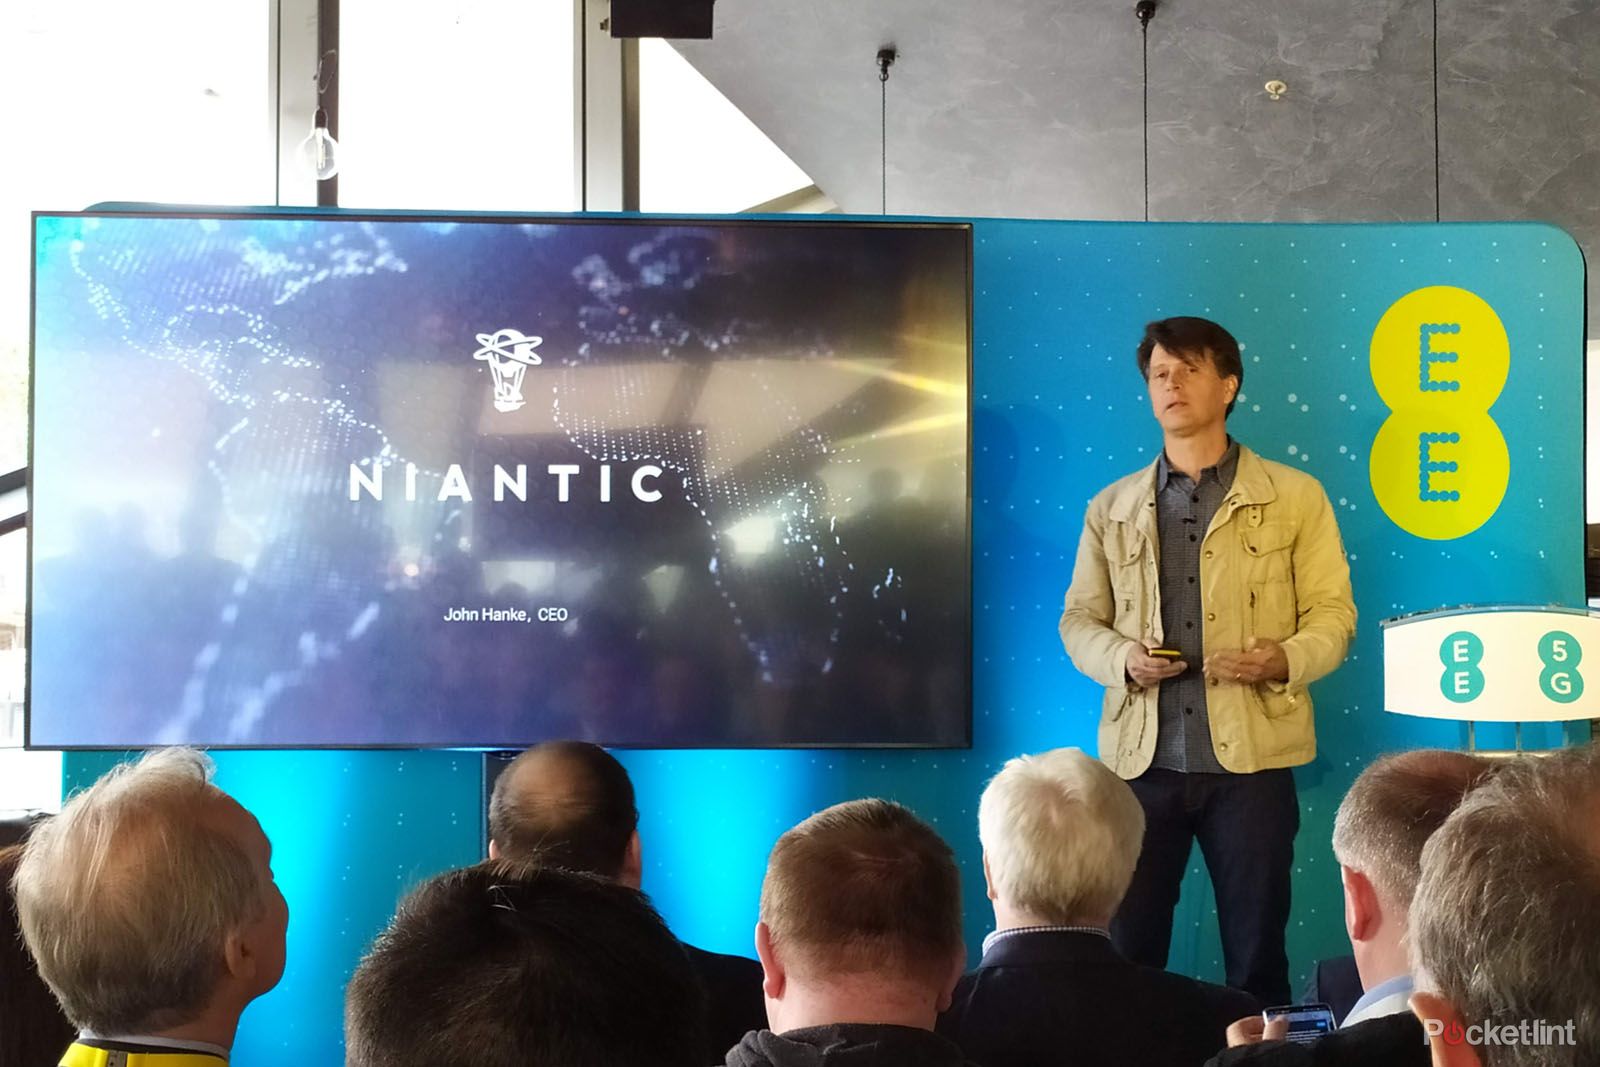 Wizards Unite Will Exclusively Launch On Ee In The Uk Niantic Confirms image 2